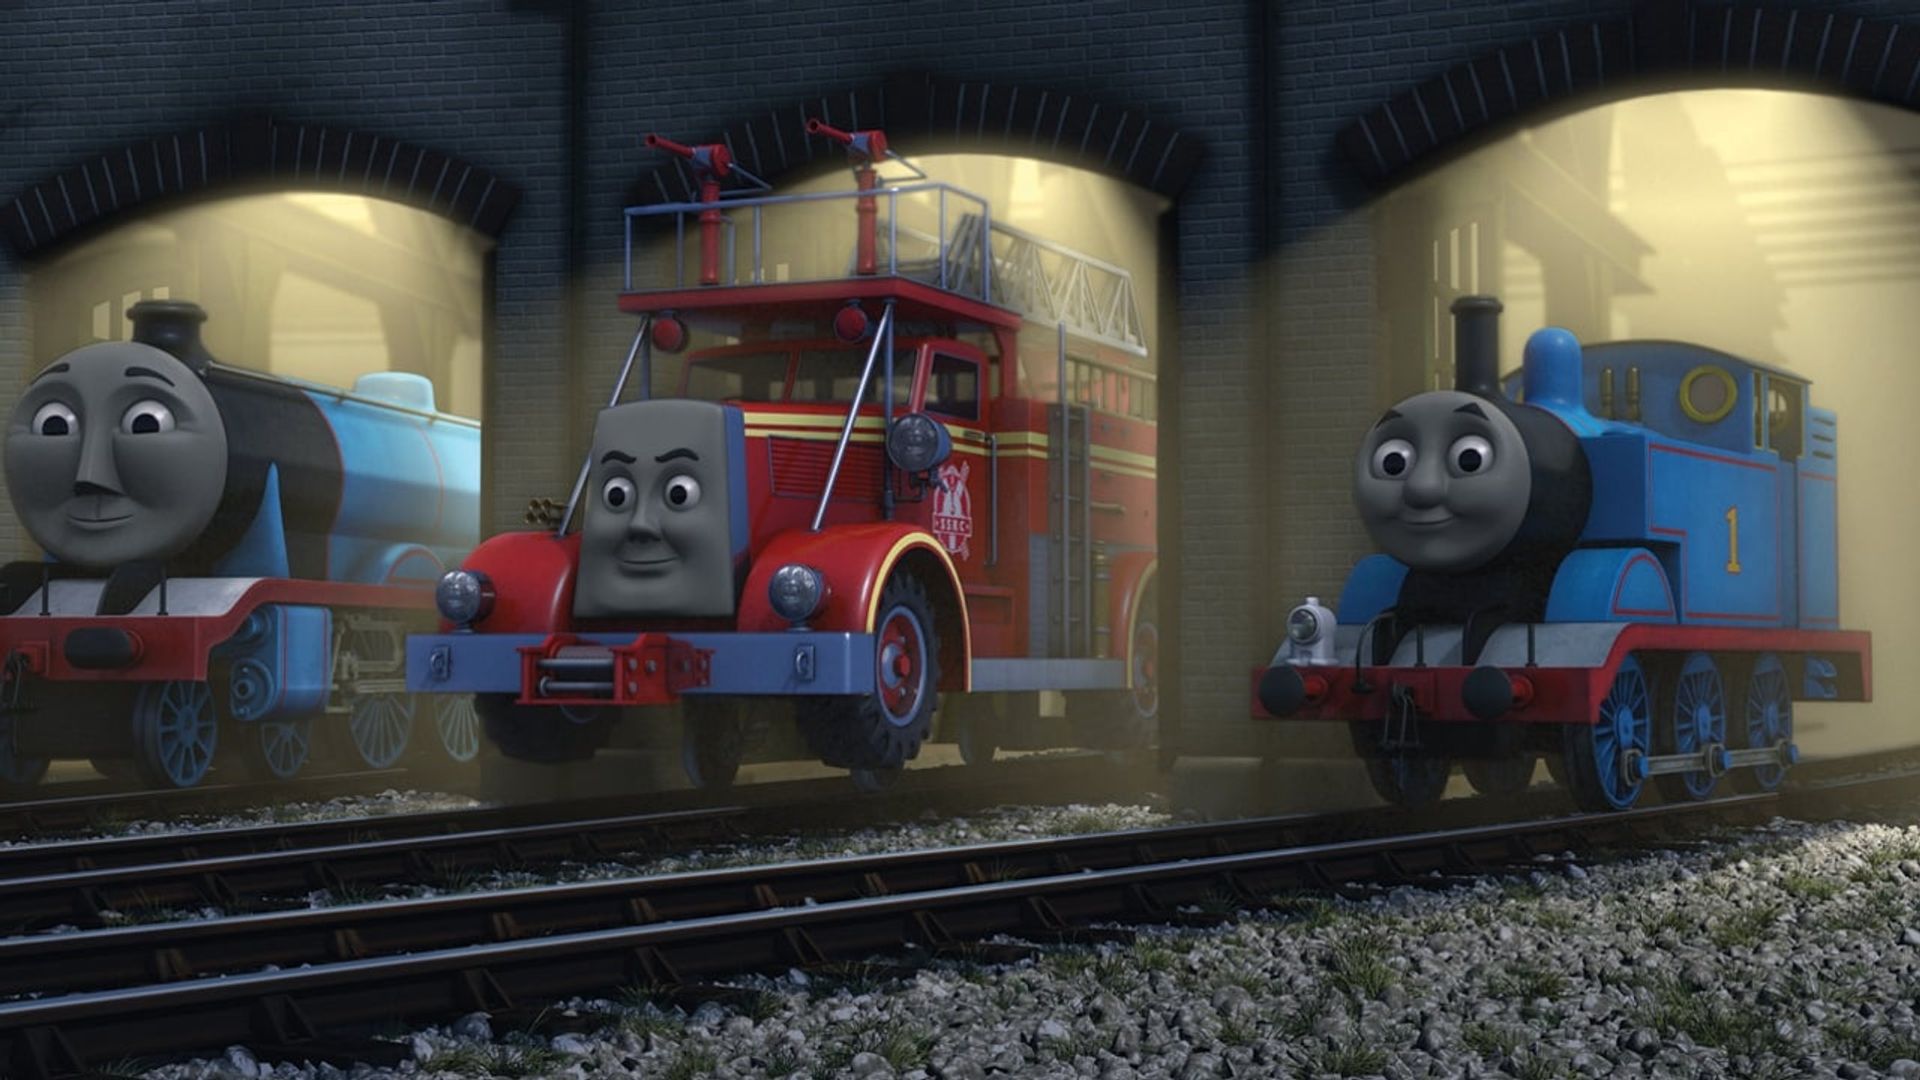 Thomas & Friends: Day of the Diesels background